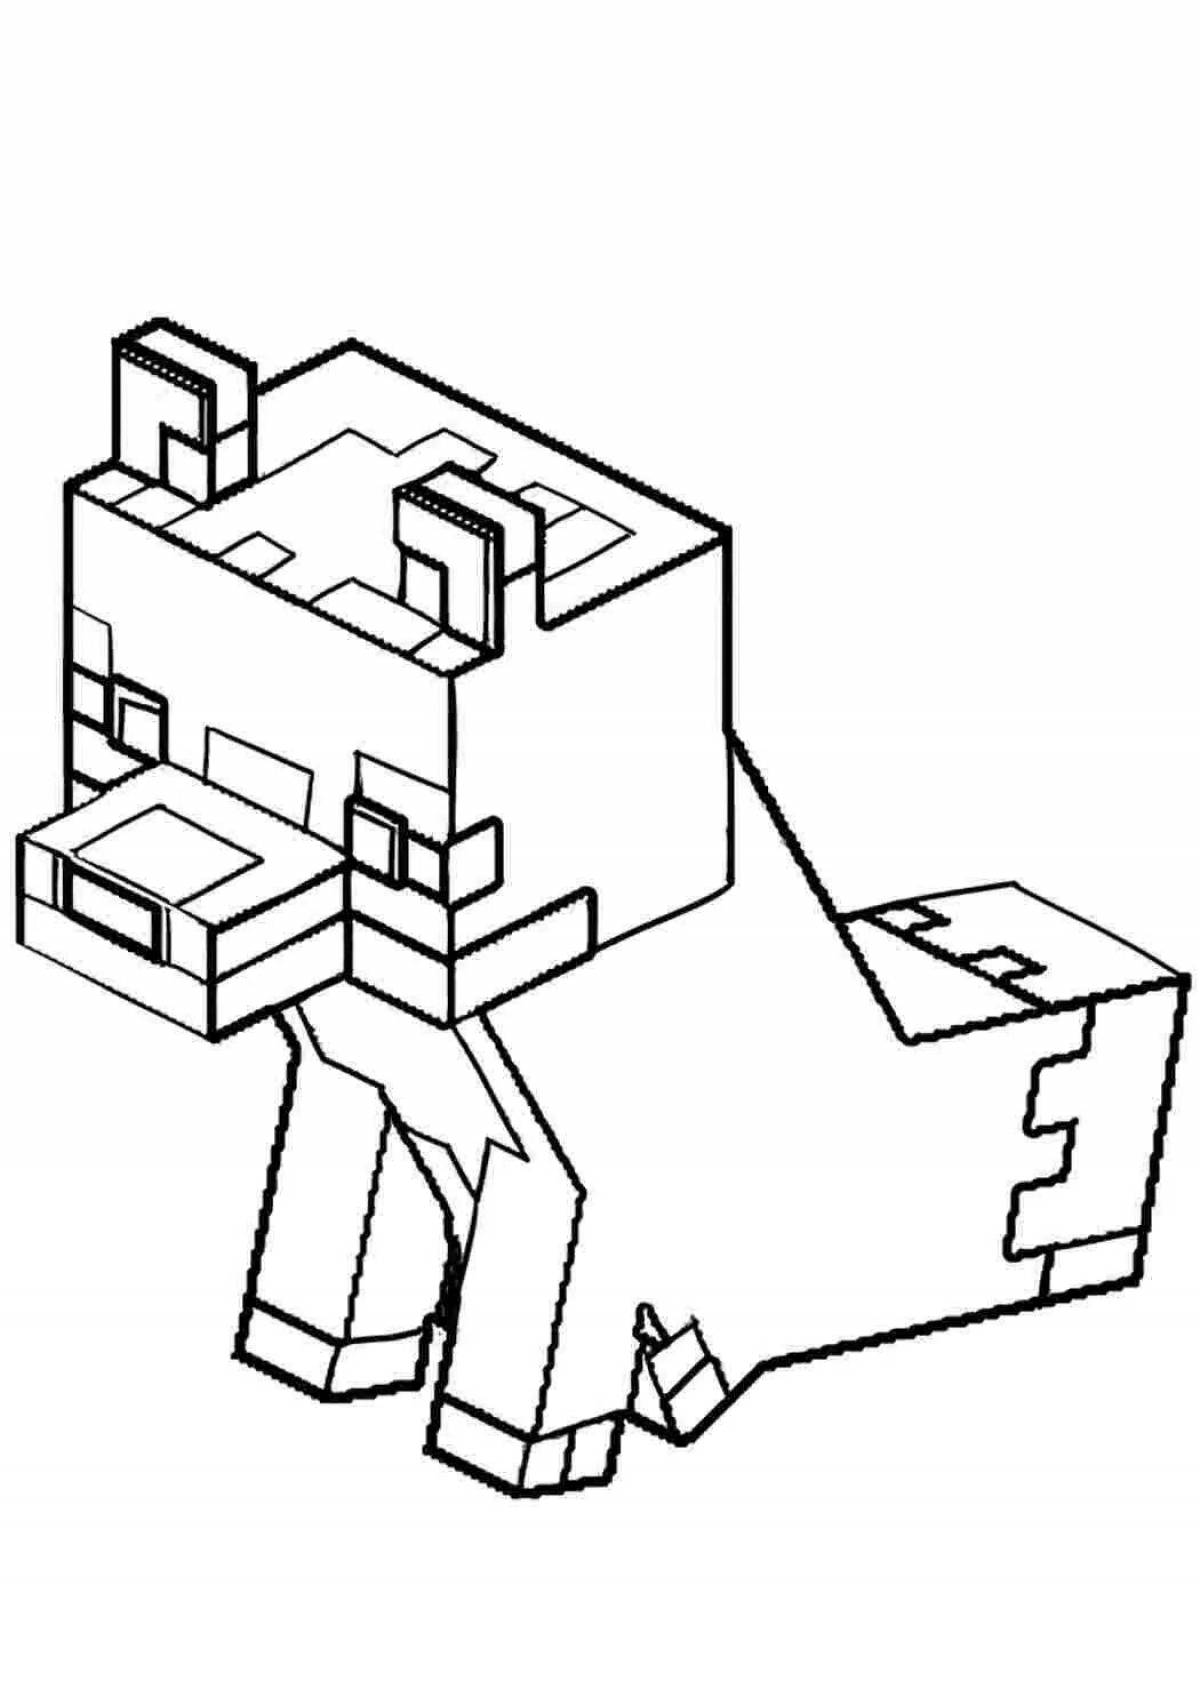 Daring minecraft dolphin coloring page